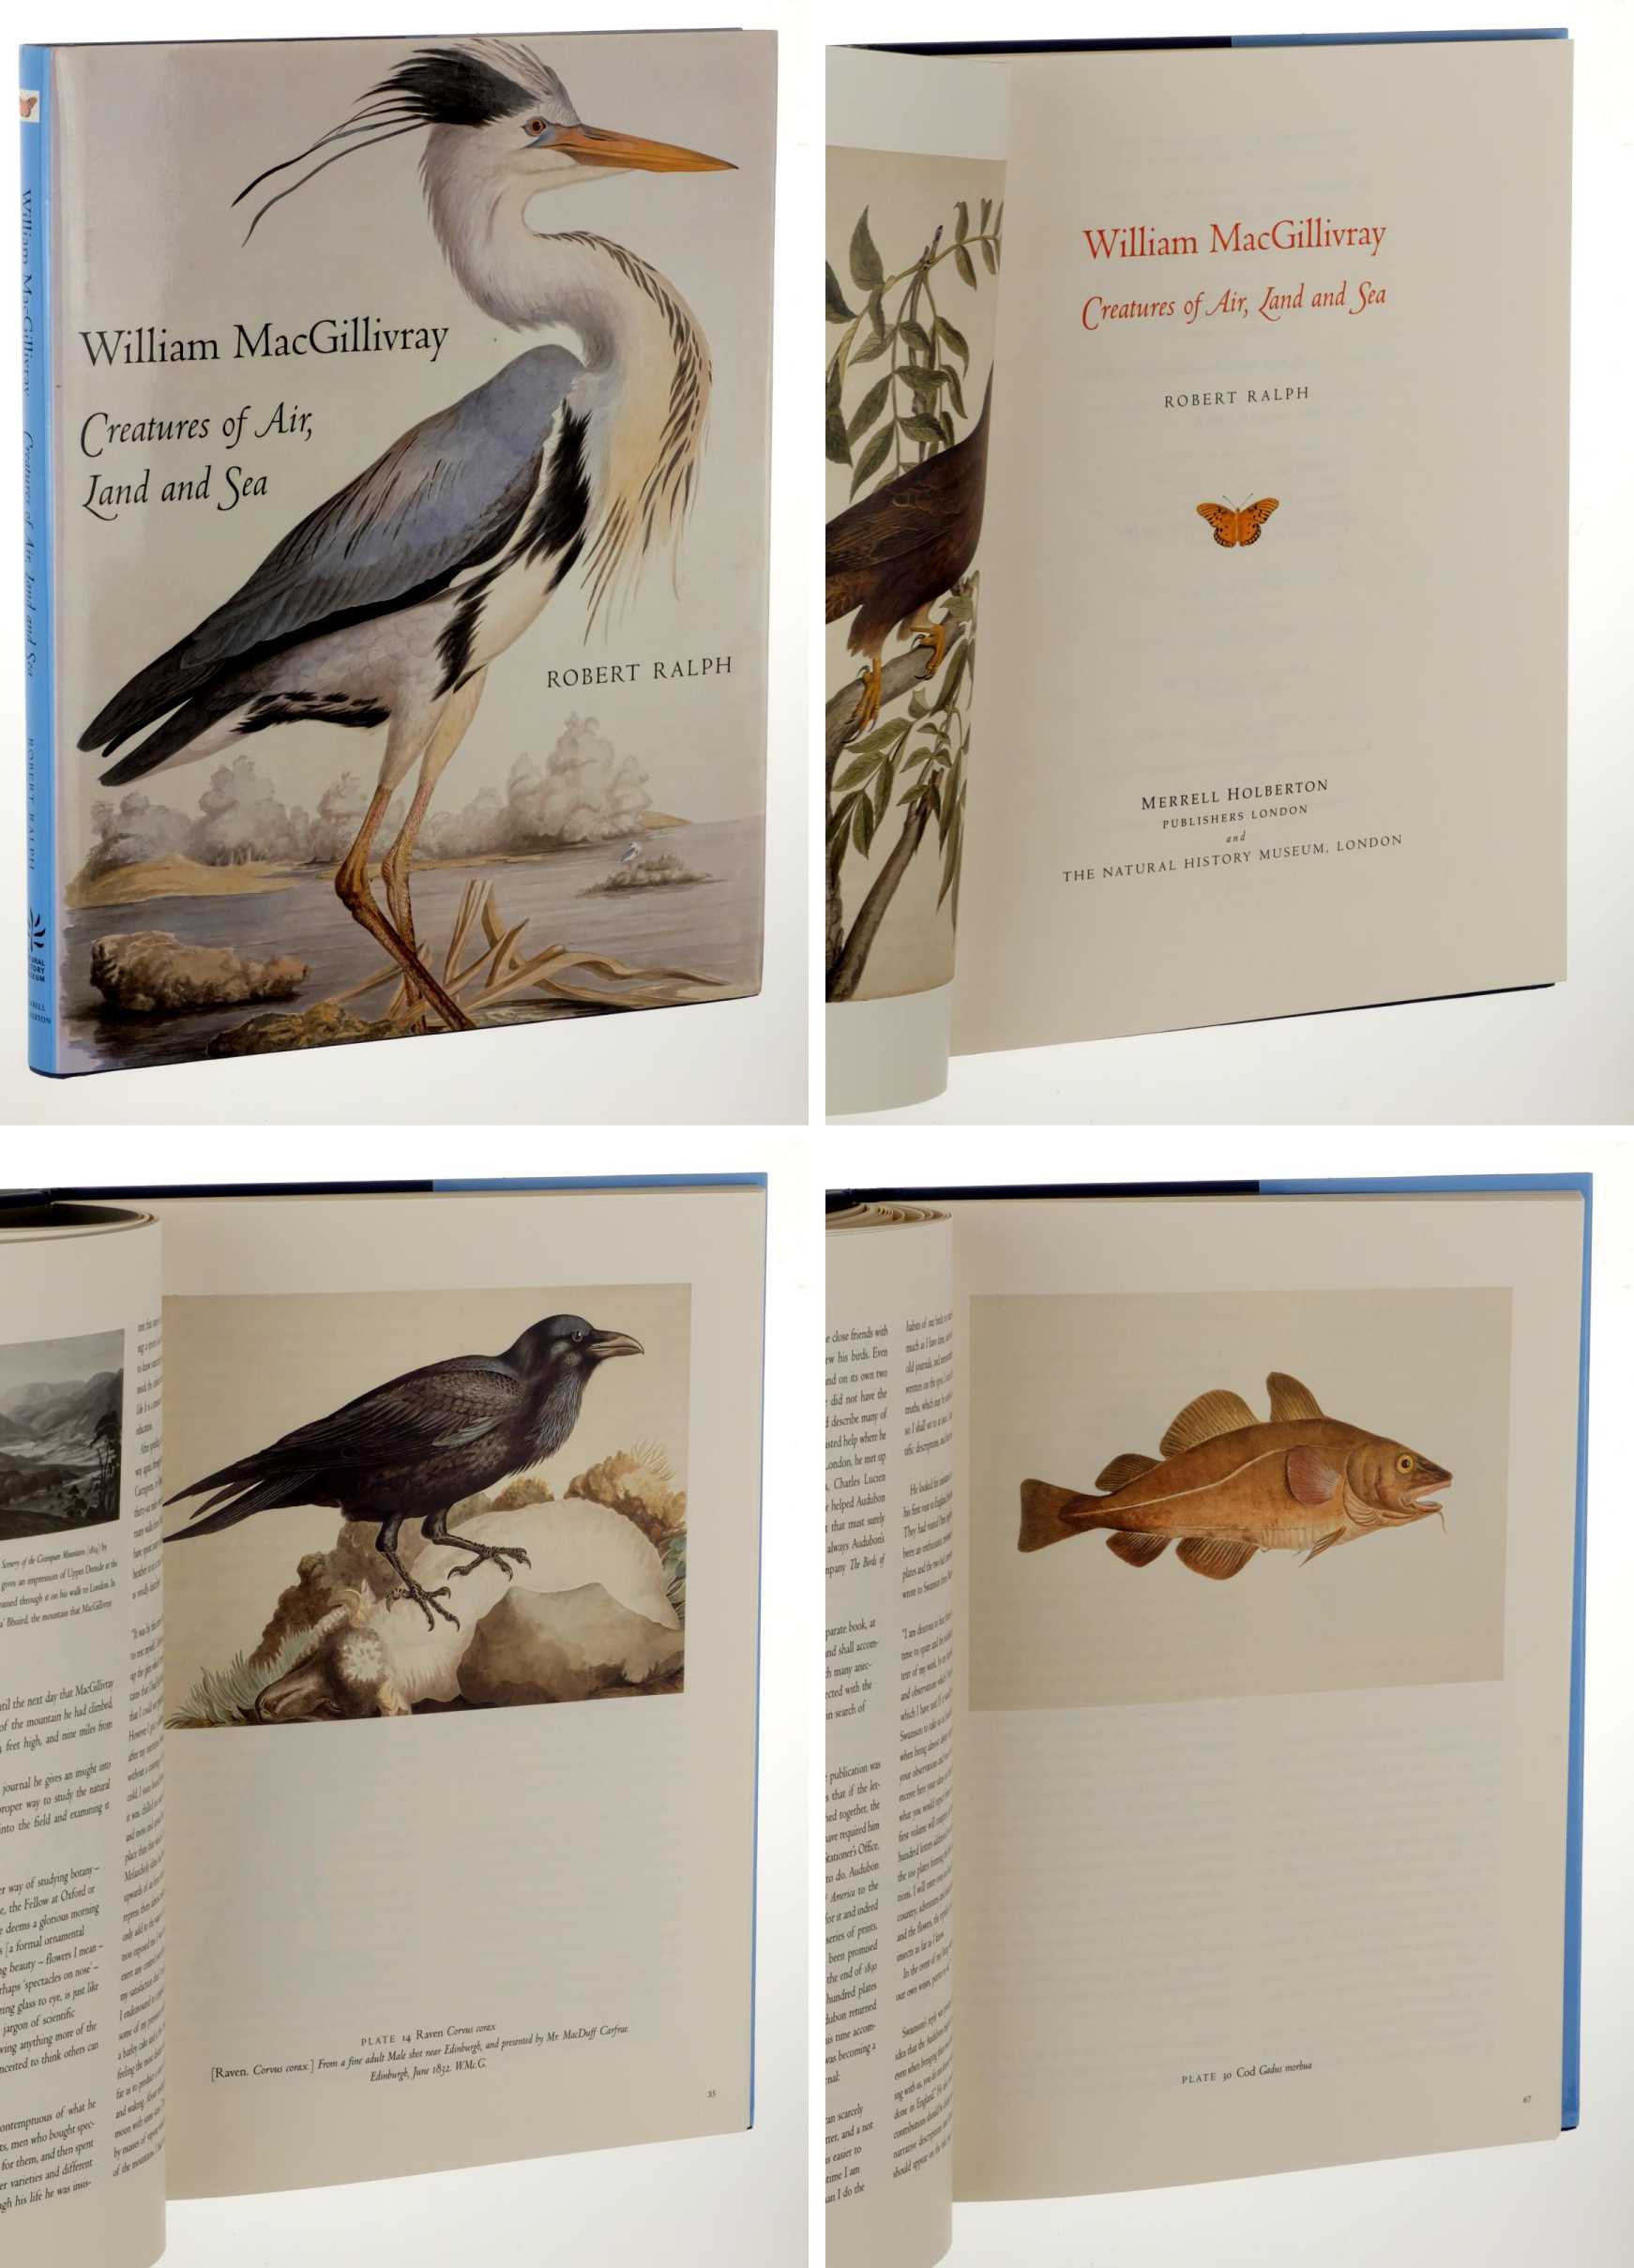 Ralph, Robert:  William MacGillivray -Creatures of Air, Land and Sea. [Photographs taken from the books and portrait collections of the Natural History Museum, London]. 